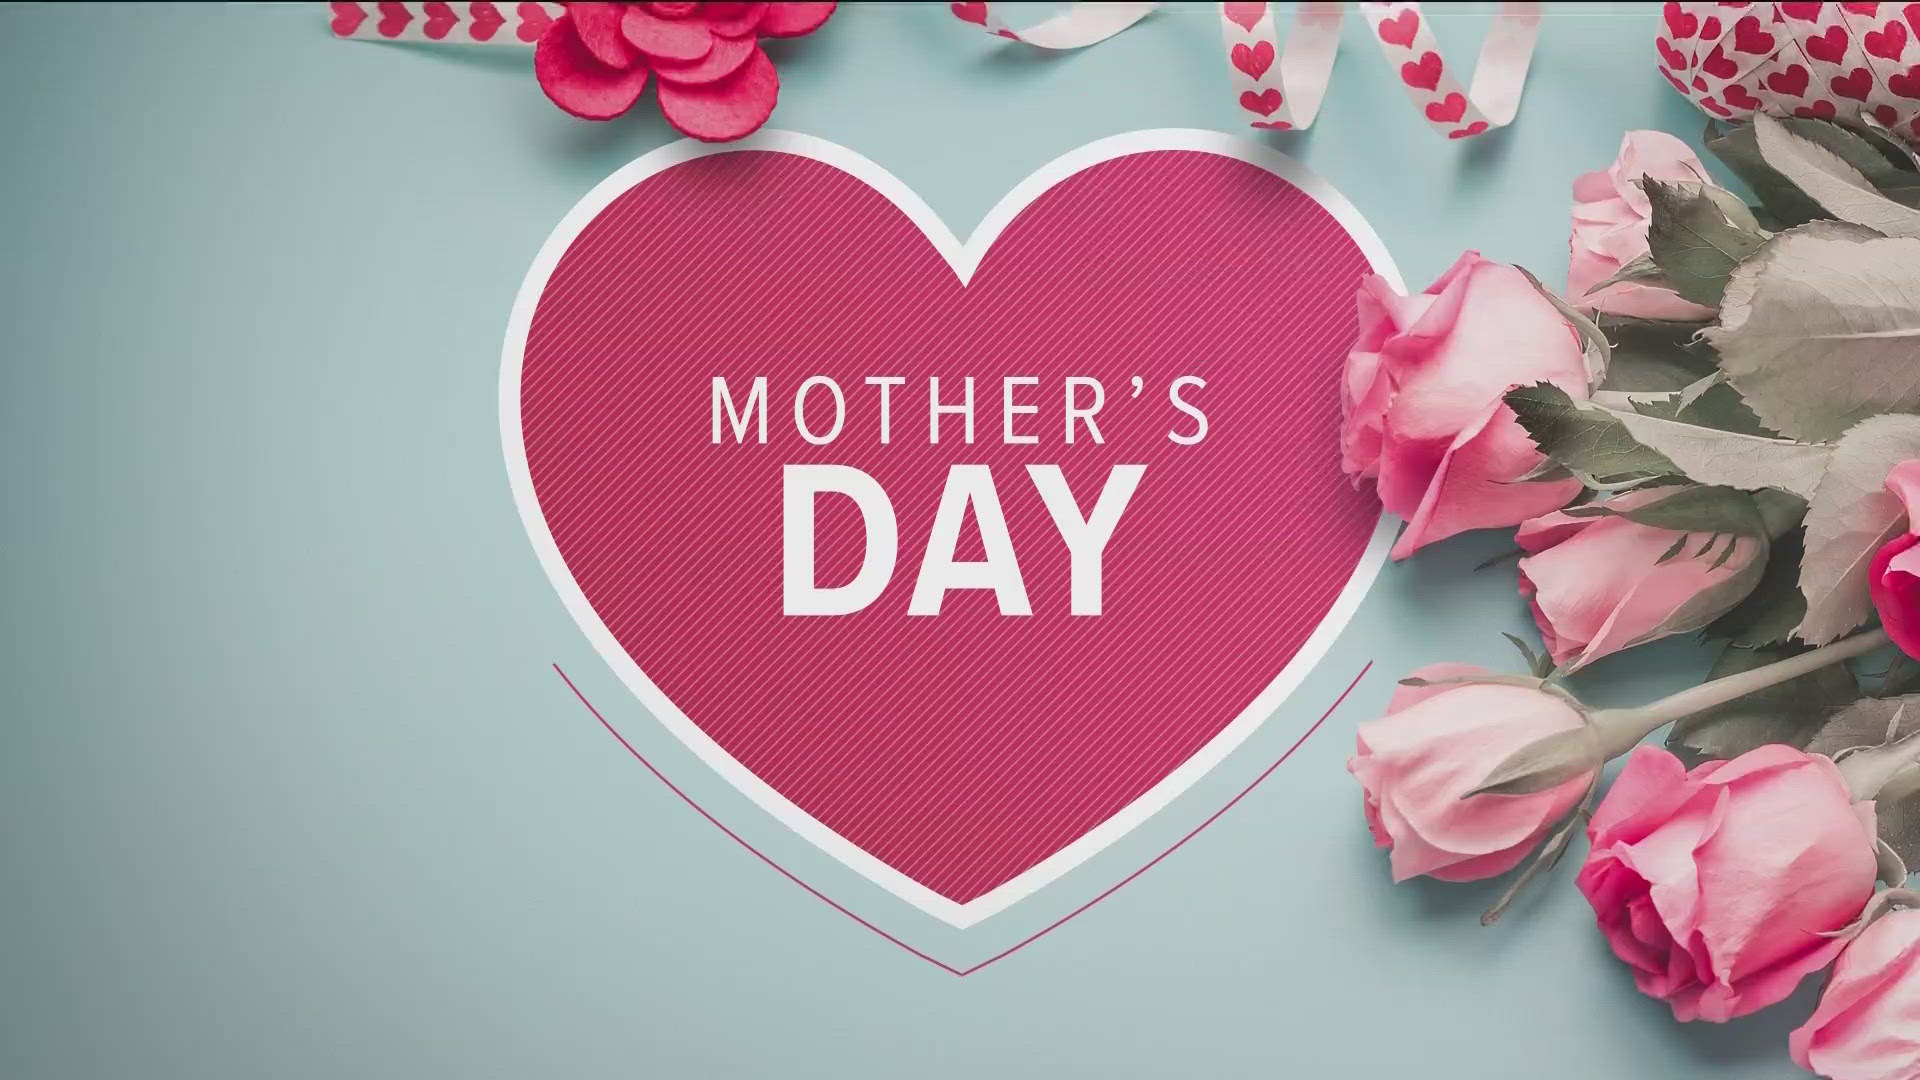 The first Mother's Day in North America was in 1908, it was given national observance in 1914 by Woodrow Wilson, but the origins were much earlier.